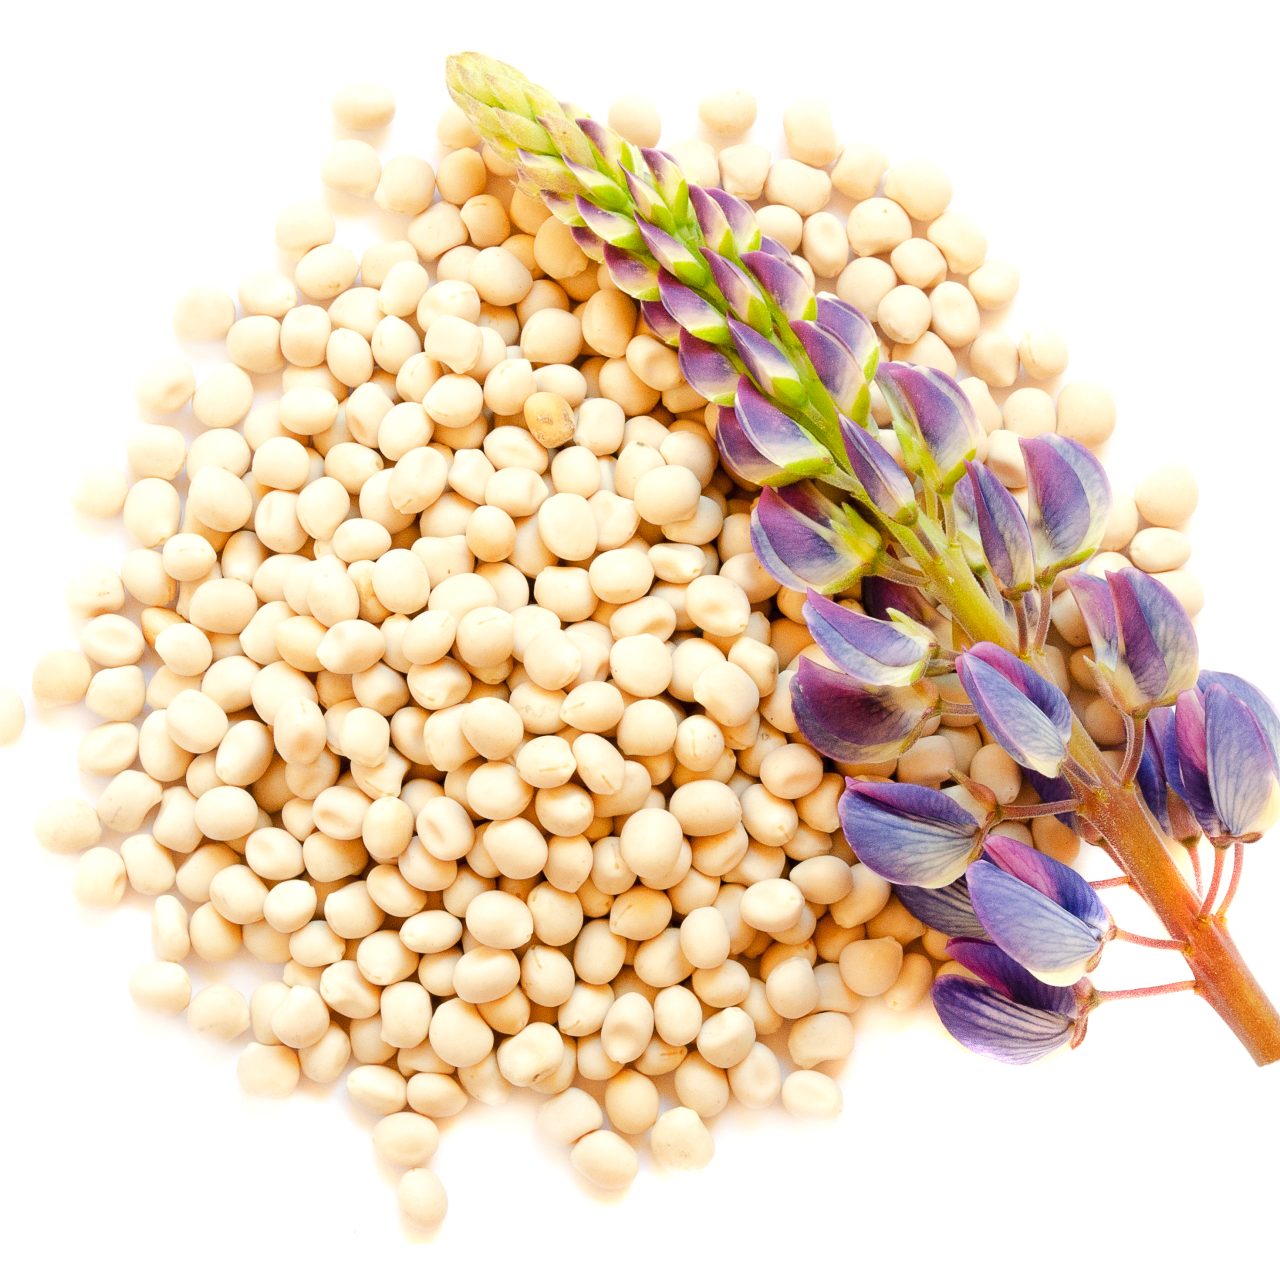 Flower,And,Seeds,Of,Lupine,On,A,White,Background,,Top